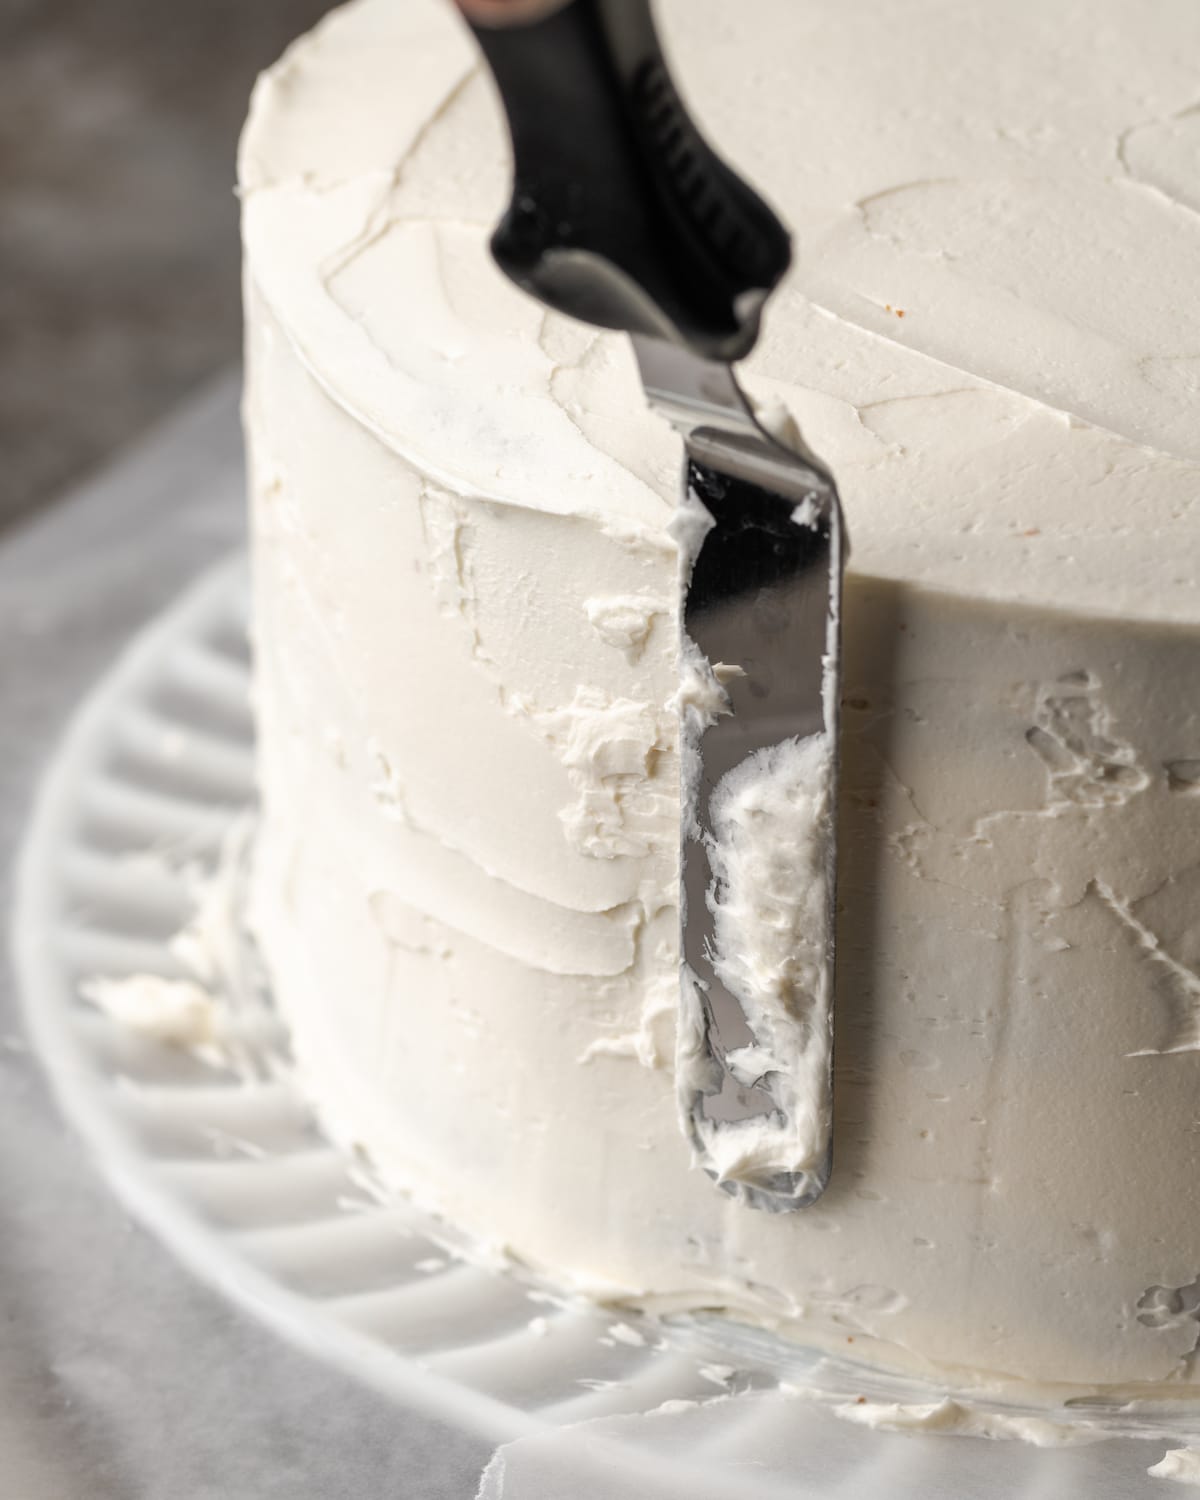 An offset spatula smoothes the frosting on the side of a cannoli cake.